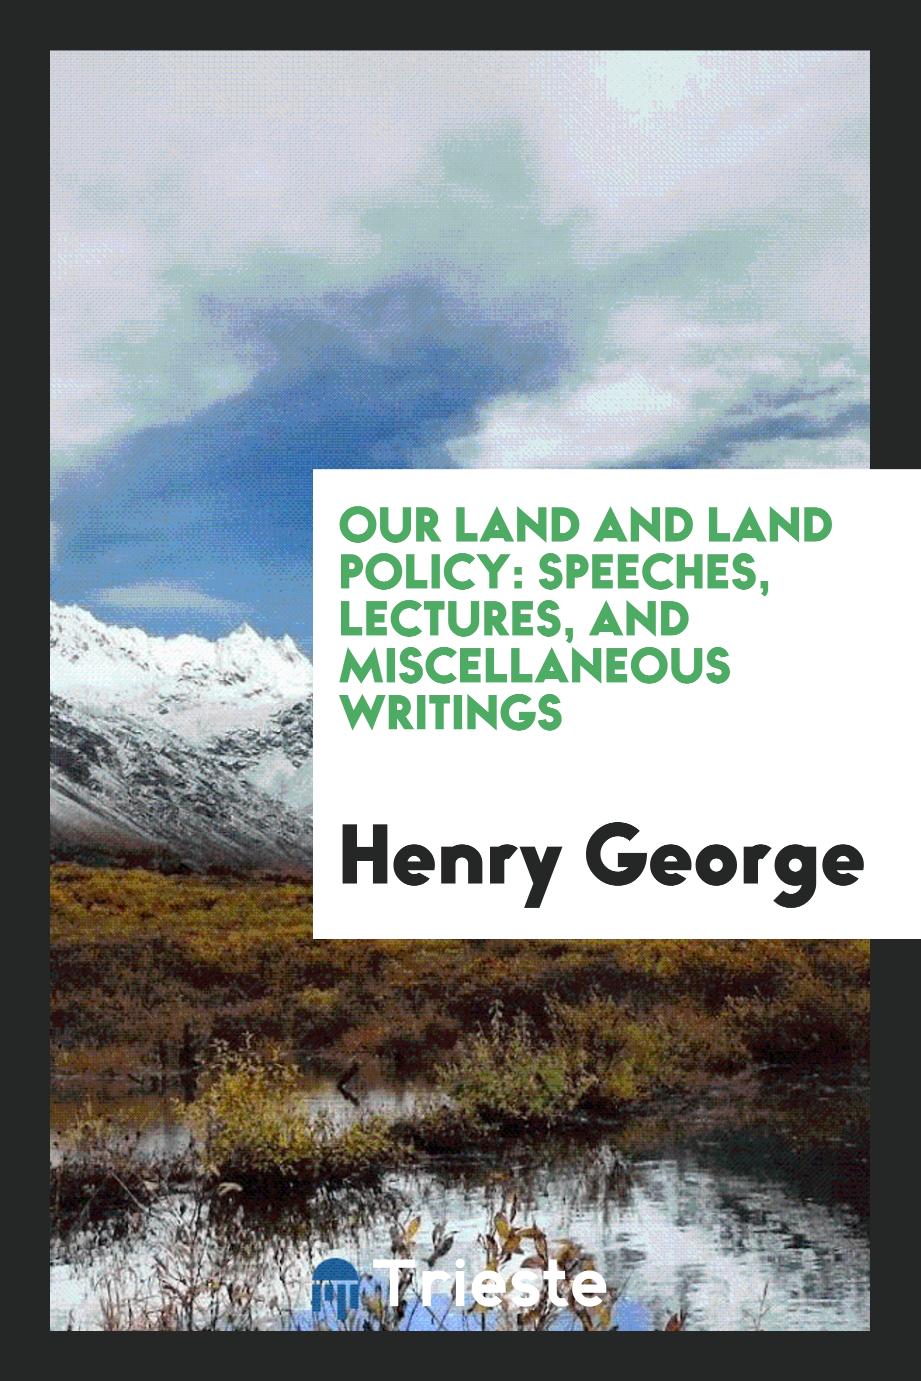 Our Land and Land Policy: Speeches, Lectures, and Miscellaneous Writings